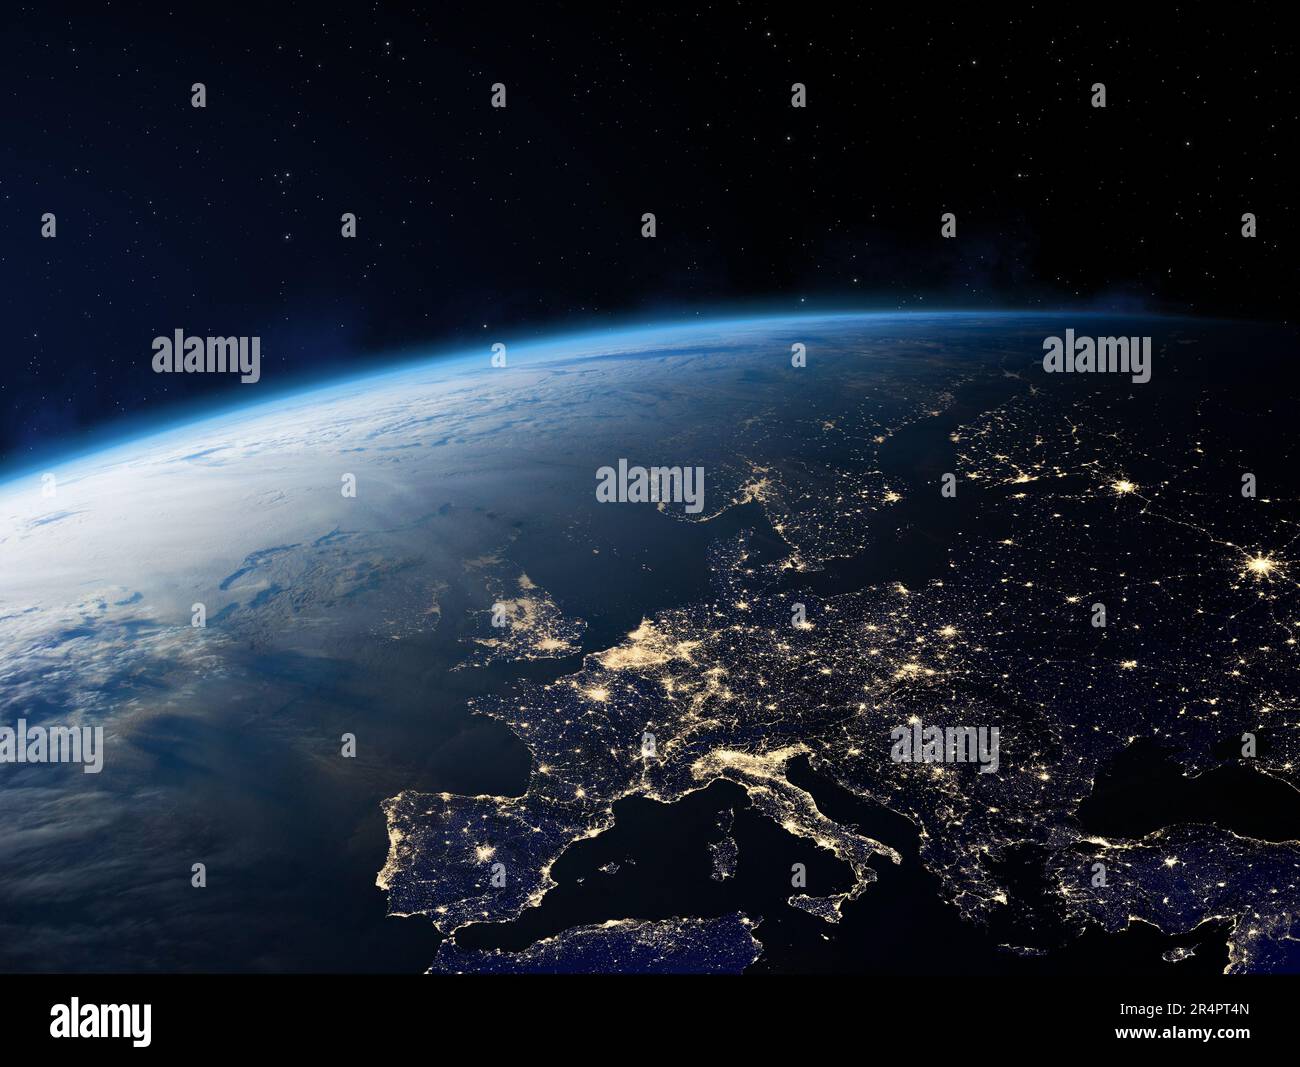 Planet Earth from the space at night. Europe at night viewed from space with city lights. Elements of this image furnished by NASA. Stock Photo